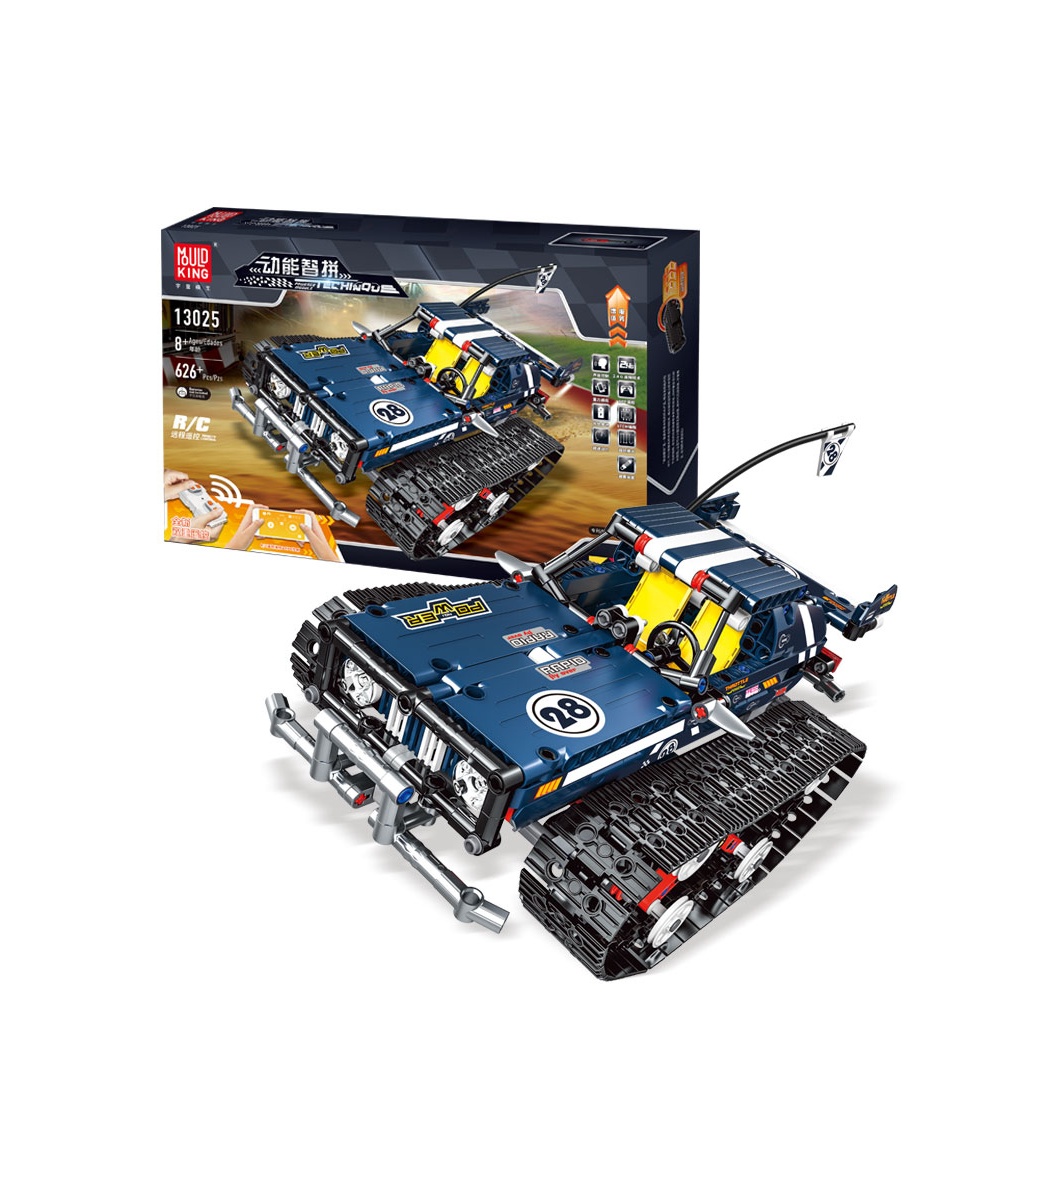 MOULD KING 13025 Tracked Car Building Block Toy Set 